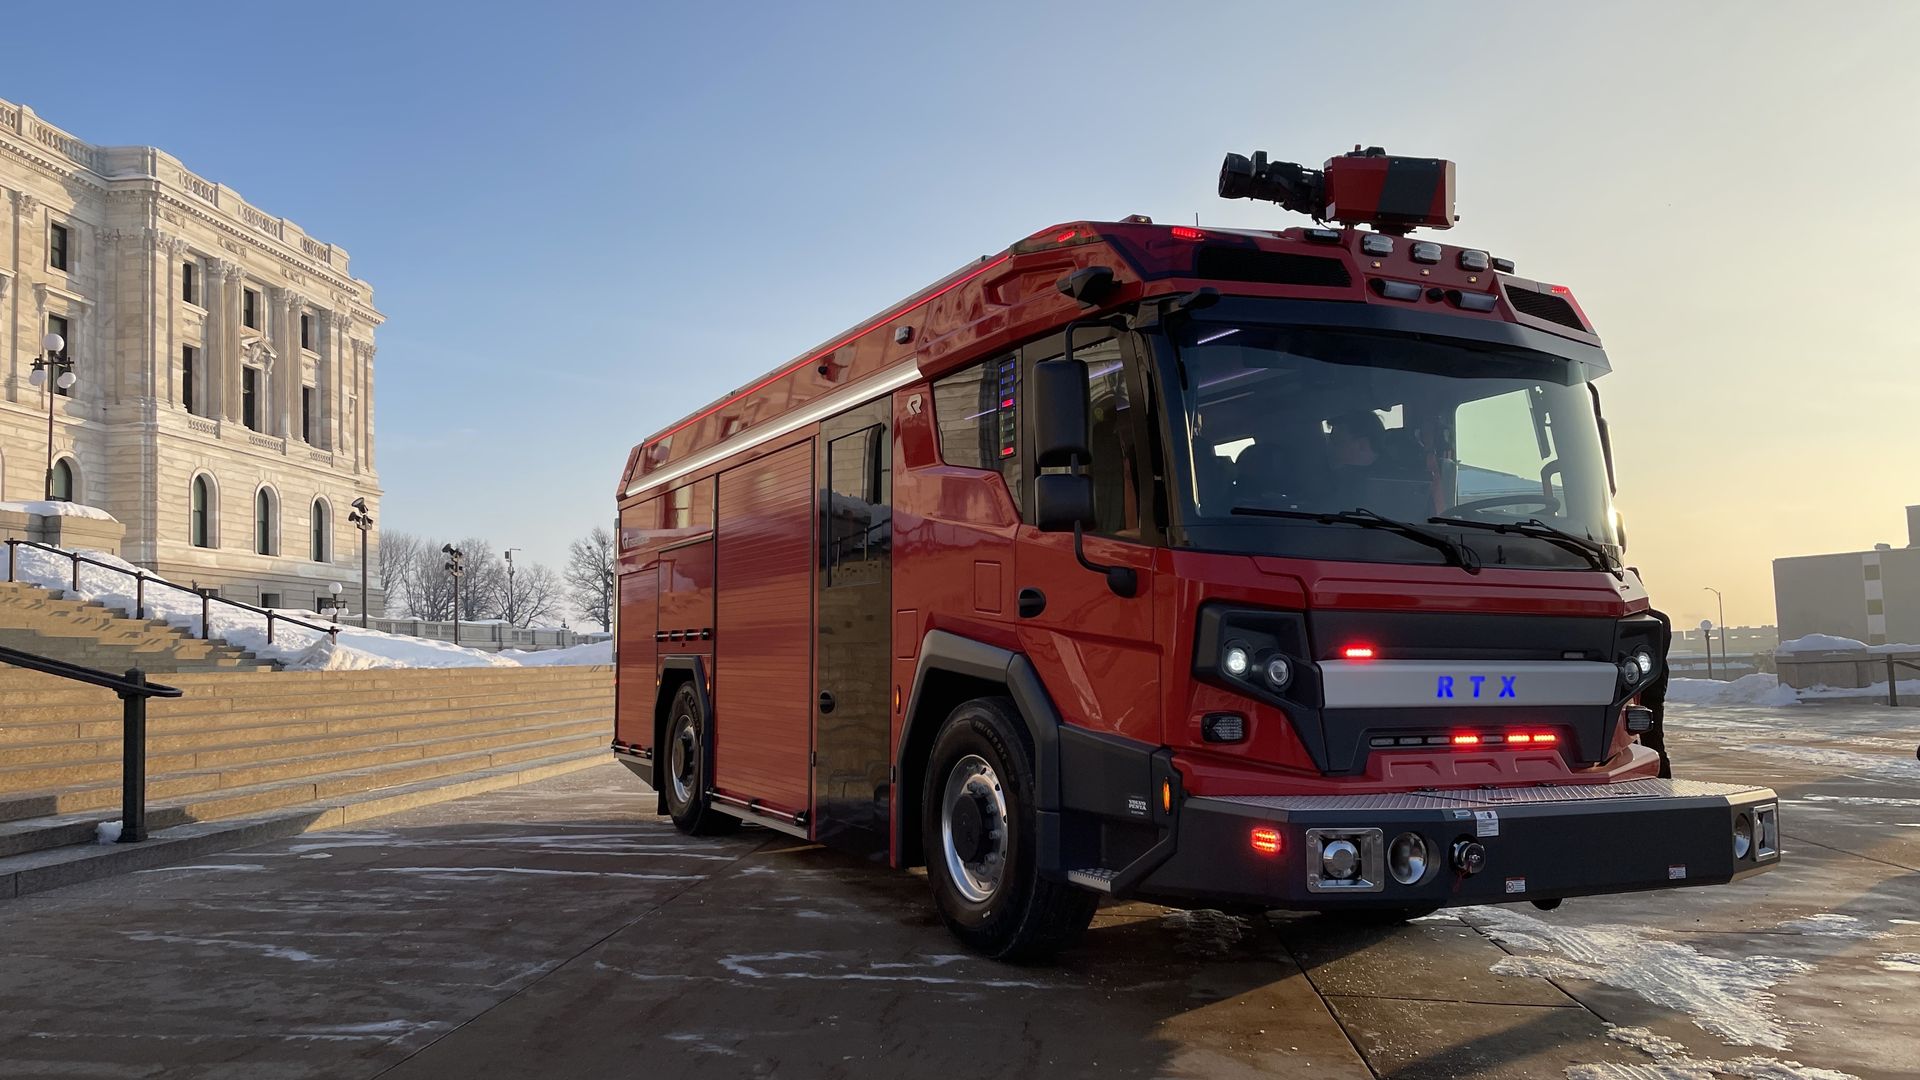 Minnesota company rolls out fully operational electric fire truck - Axios  Twin Cities